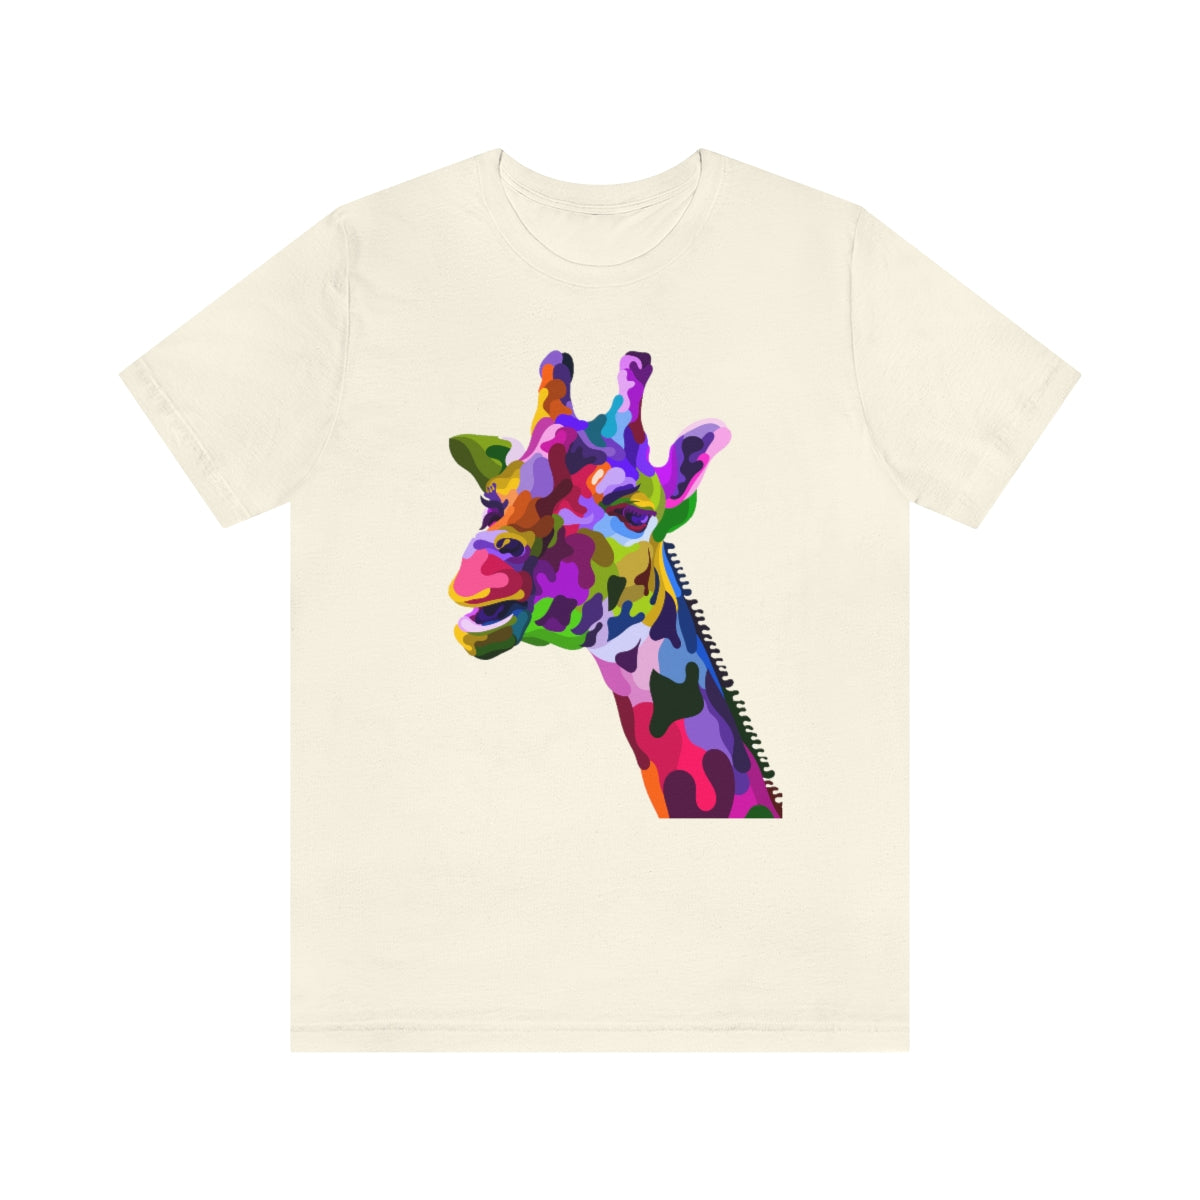 Unisex Jersey Short Sleeve Tee "Abstract colorful geraffe"